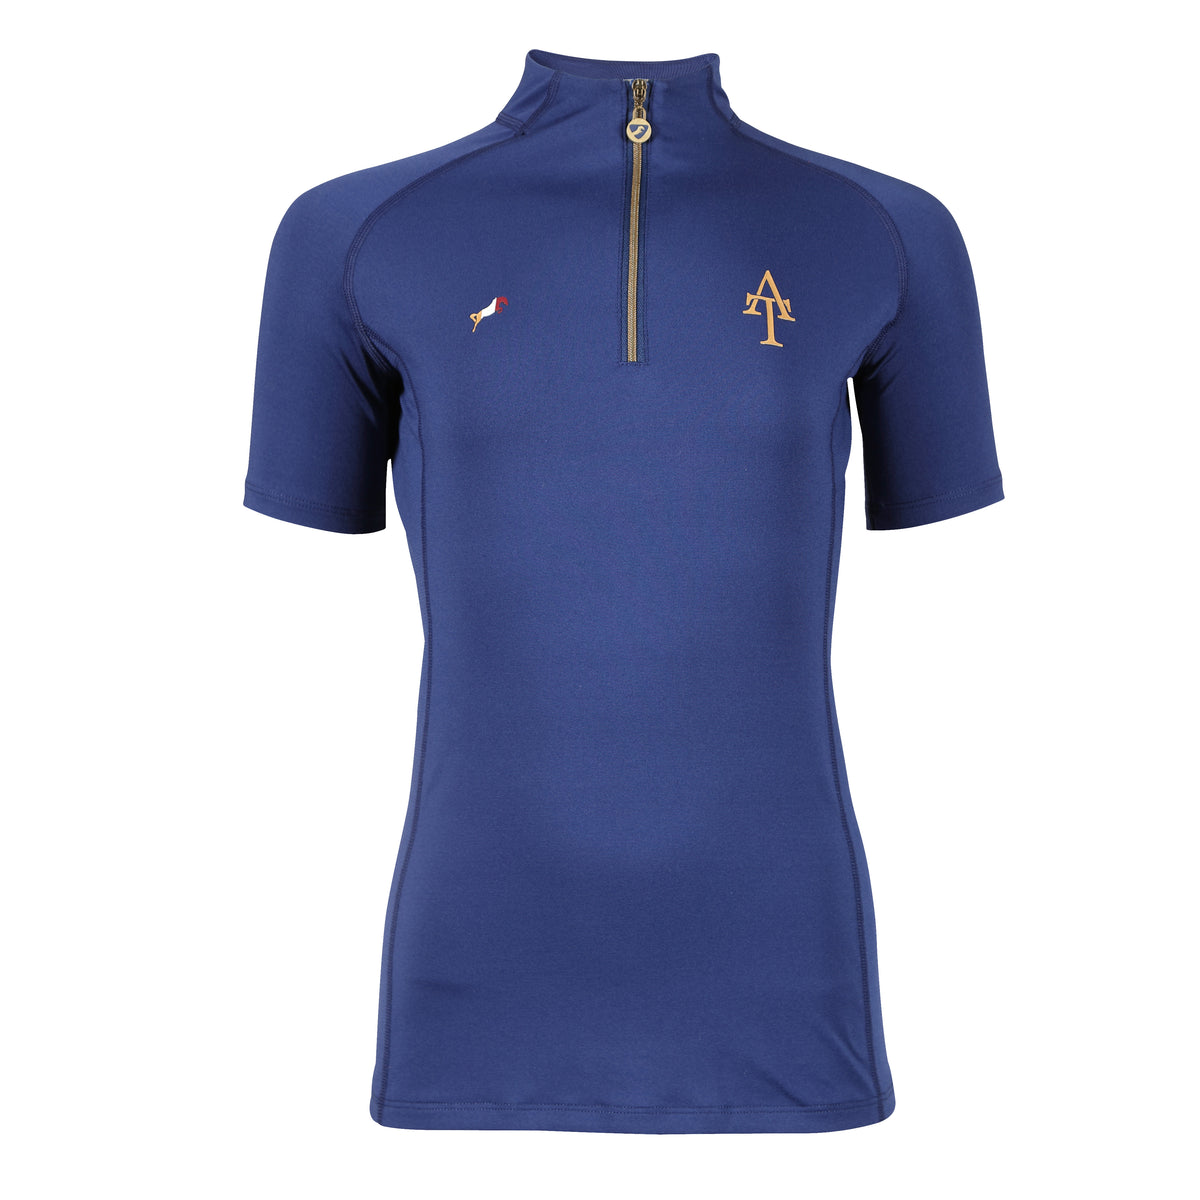 Shires Young Rider Aubrion Team Short Sleeve Base Layer